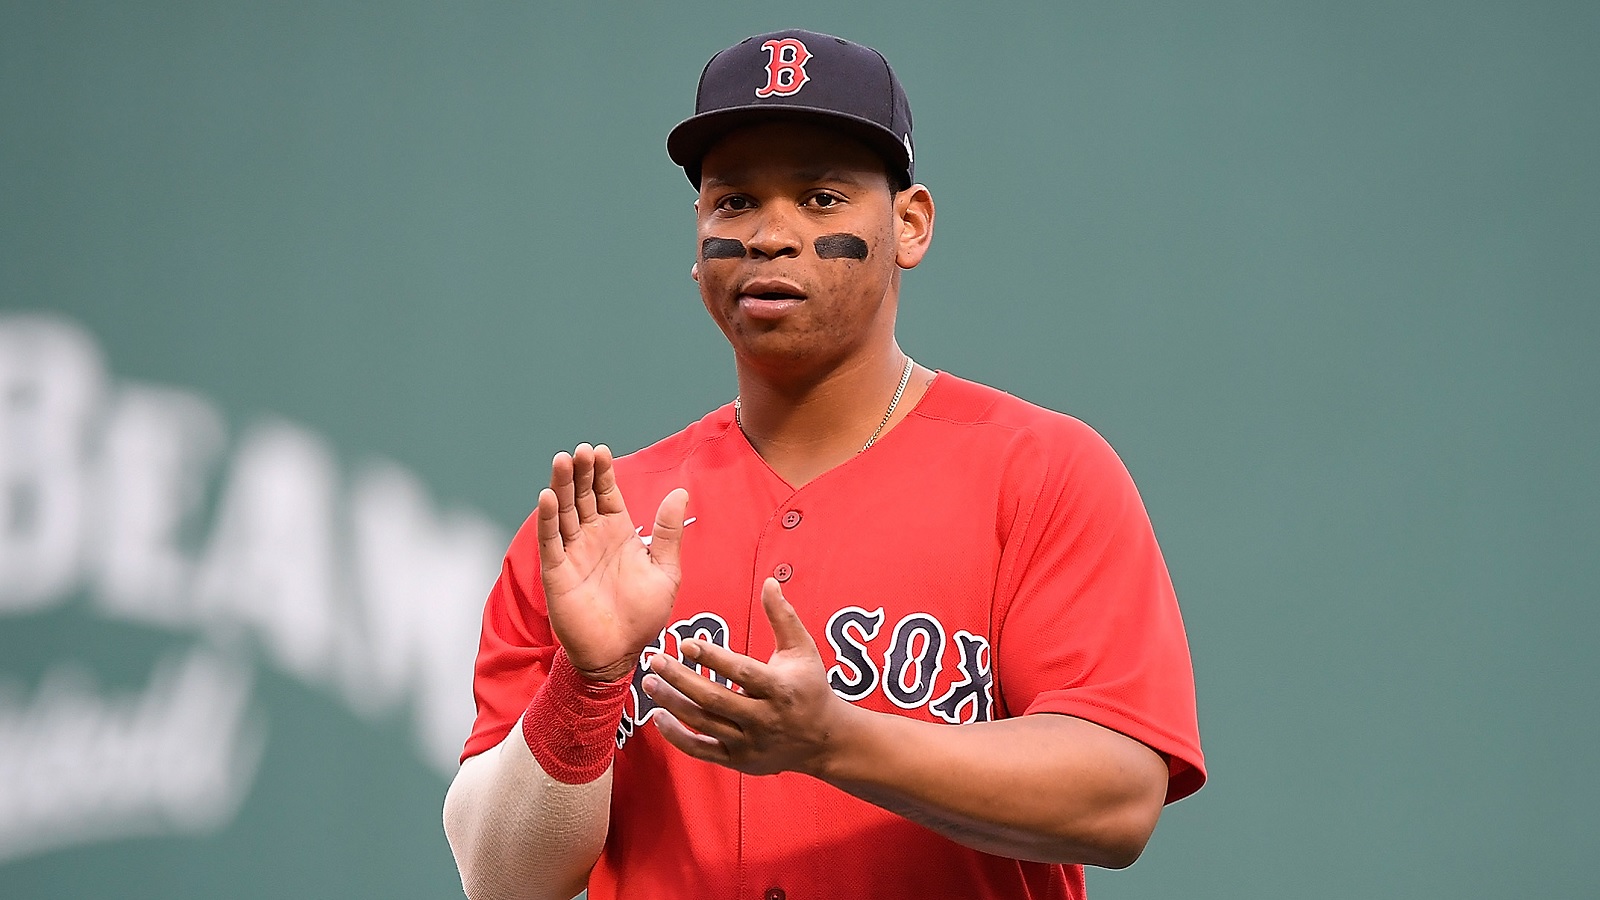 Rafael Devers had classic postgame interview after big HR